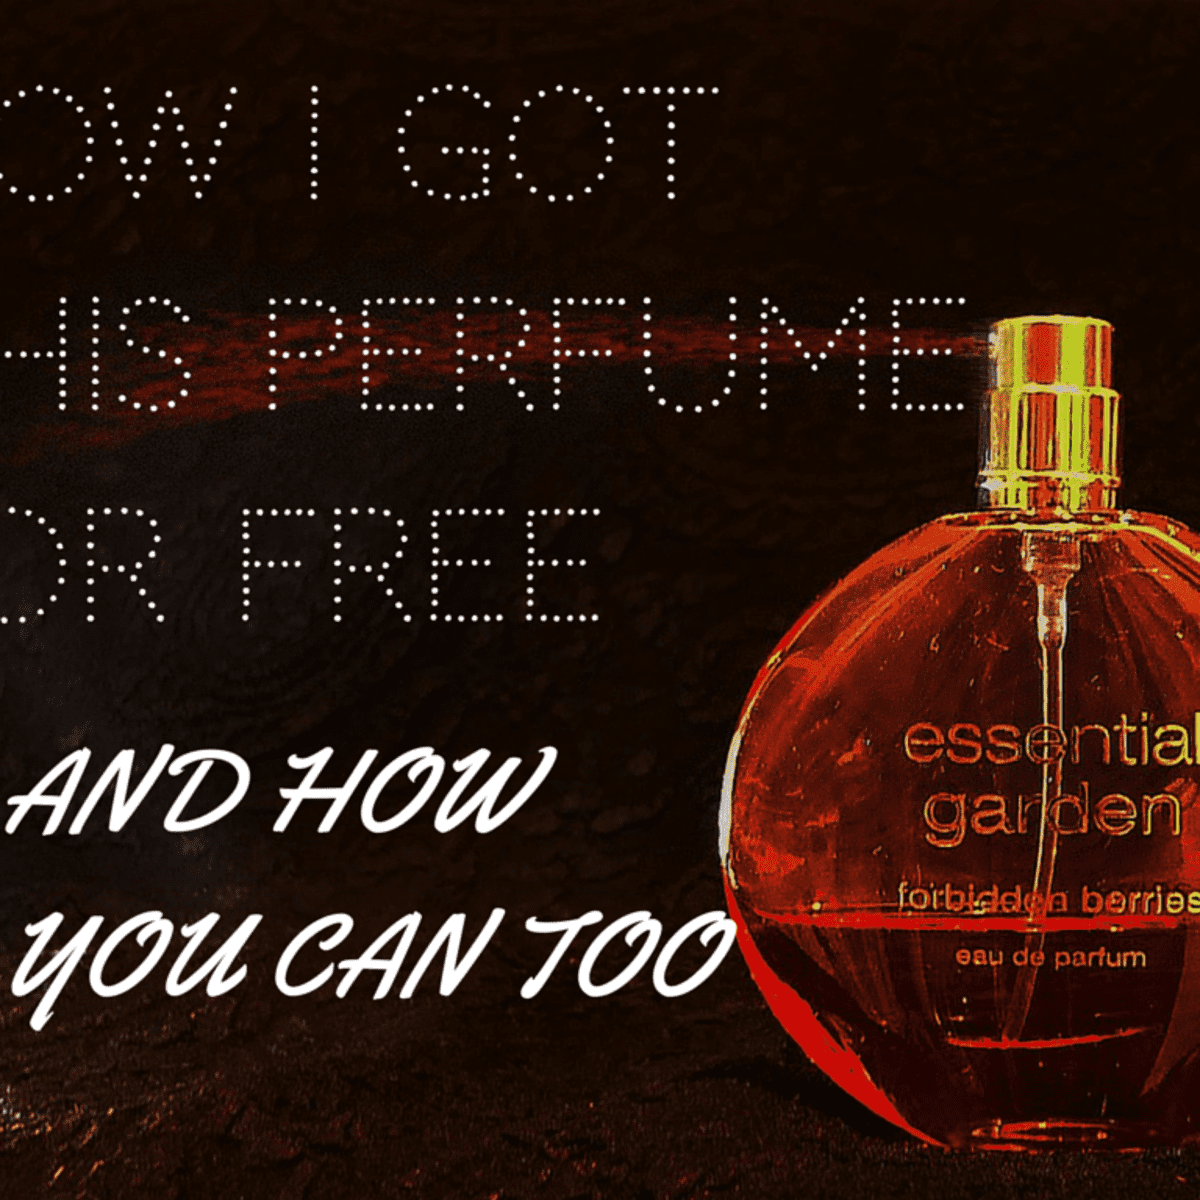 3 Easy Steps to Get Free Perfume Samples - ToughNickel